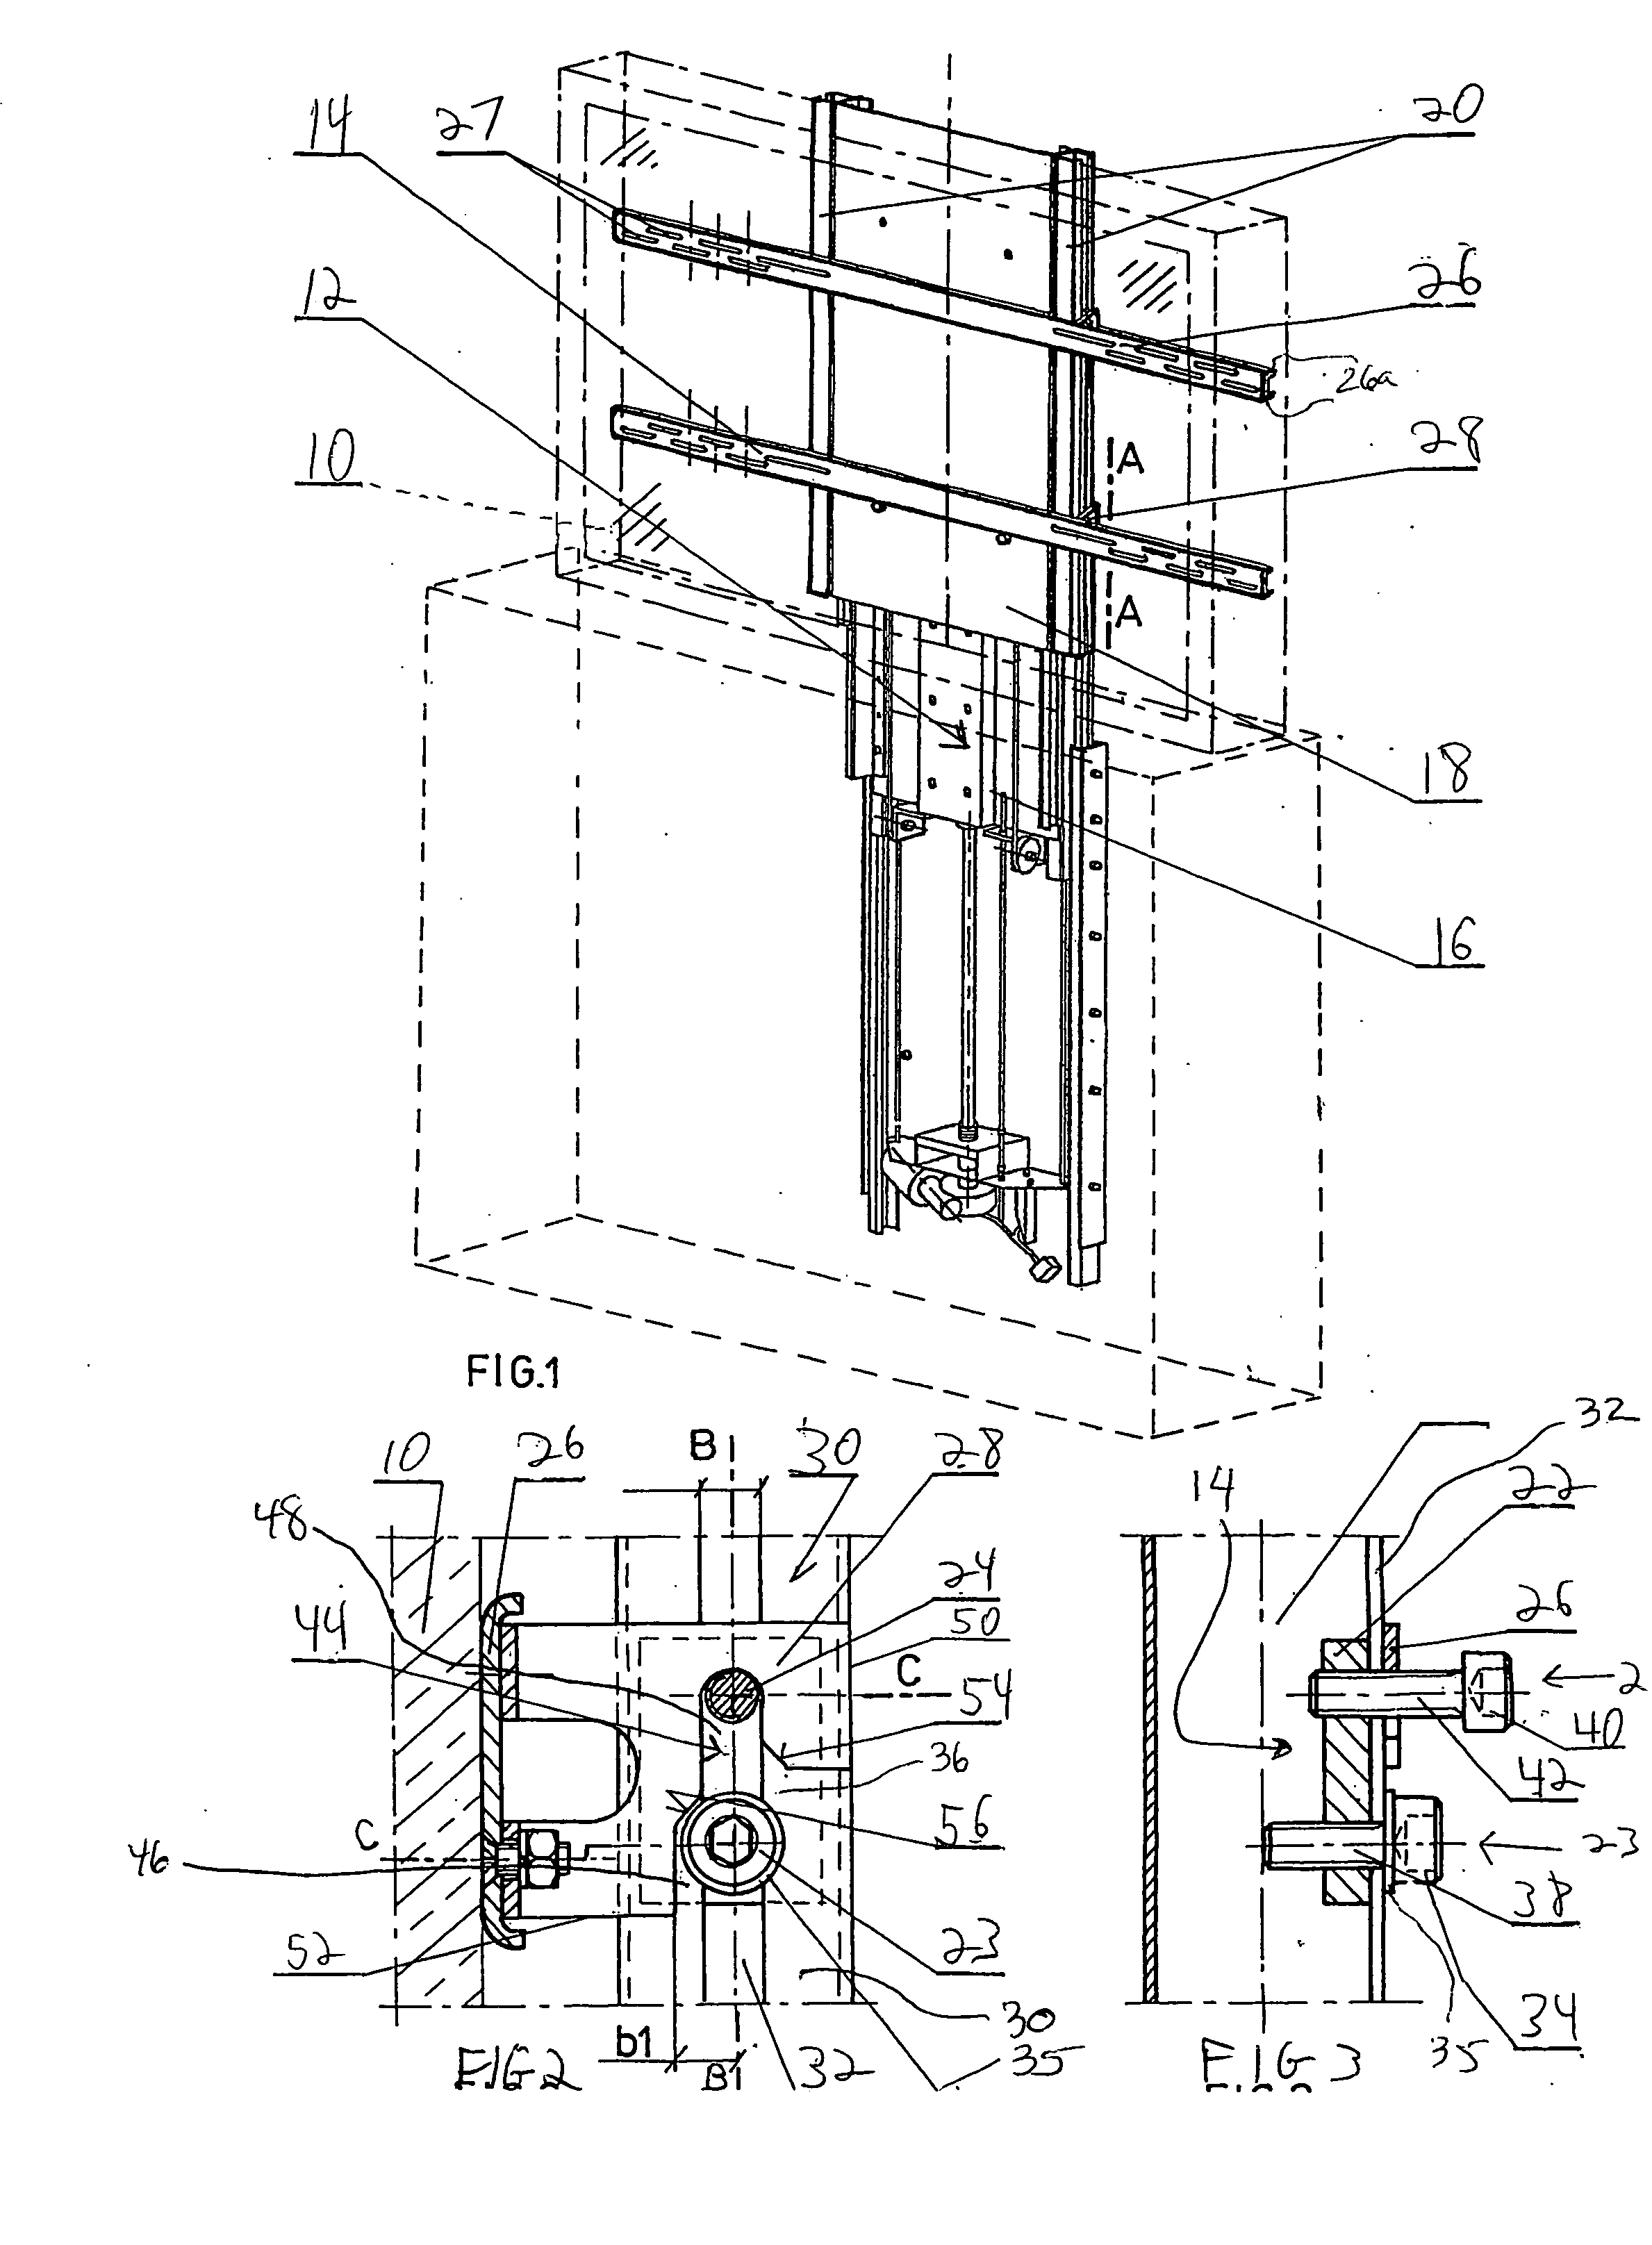 Apparatus for mounting a flat screen display device to a lift mechanism